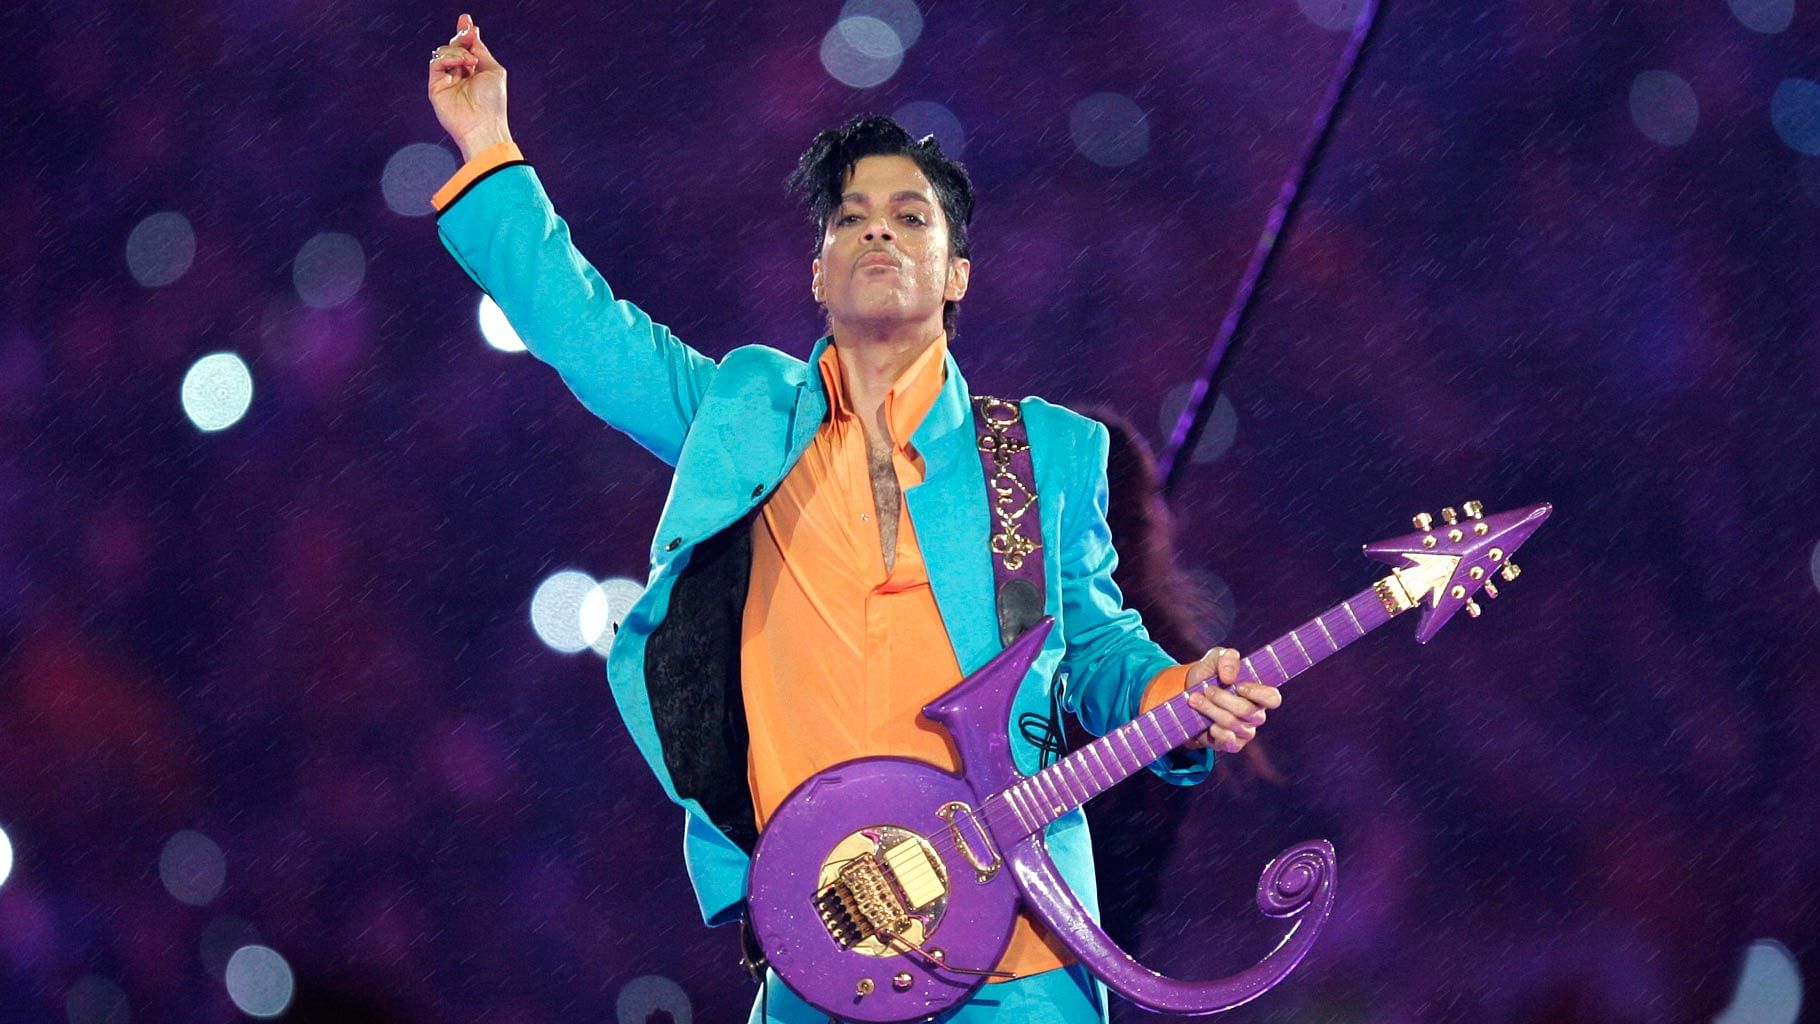 File photo of Prince performing during the halftime show at the Super Bowl XLI football game at Dolphin Stadium in Miami on 4 February 2007. (Photo: AP)